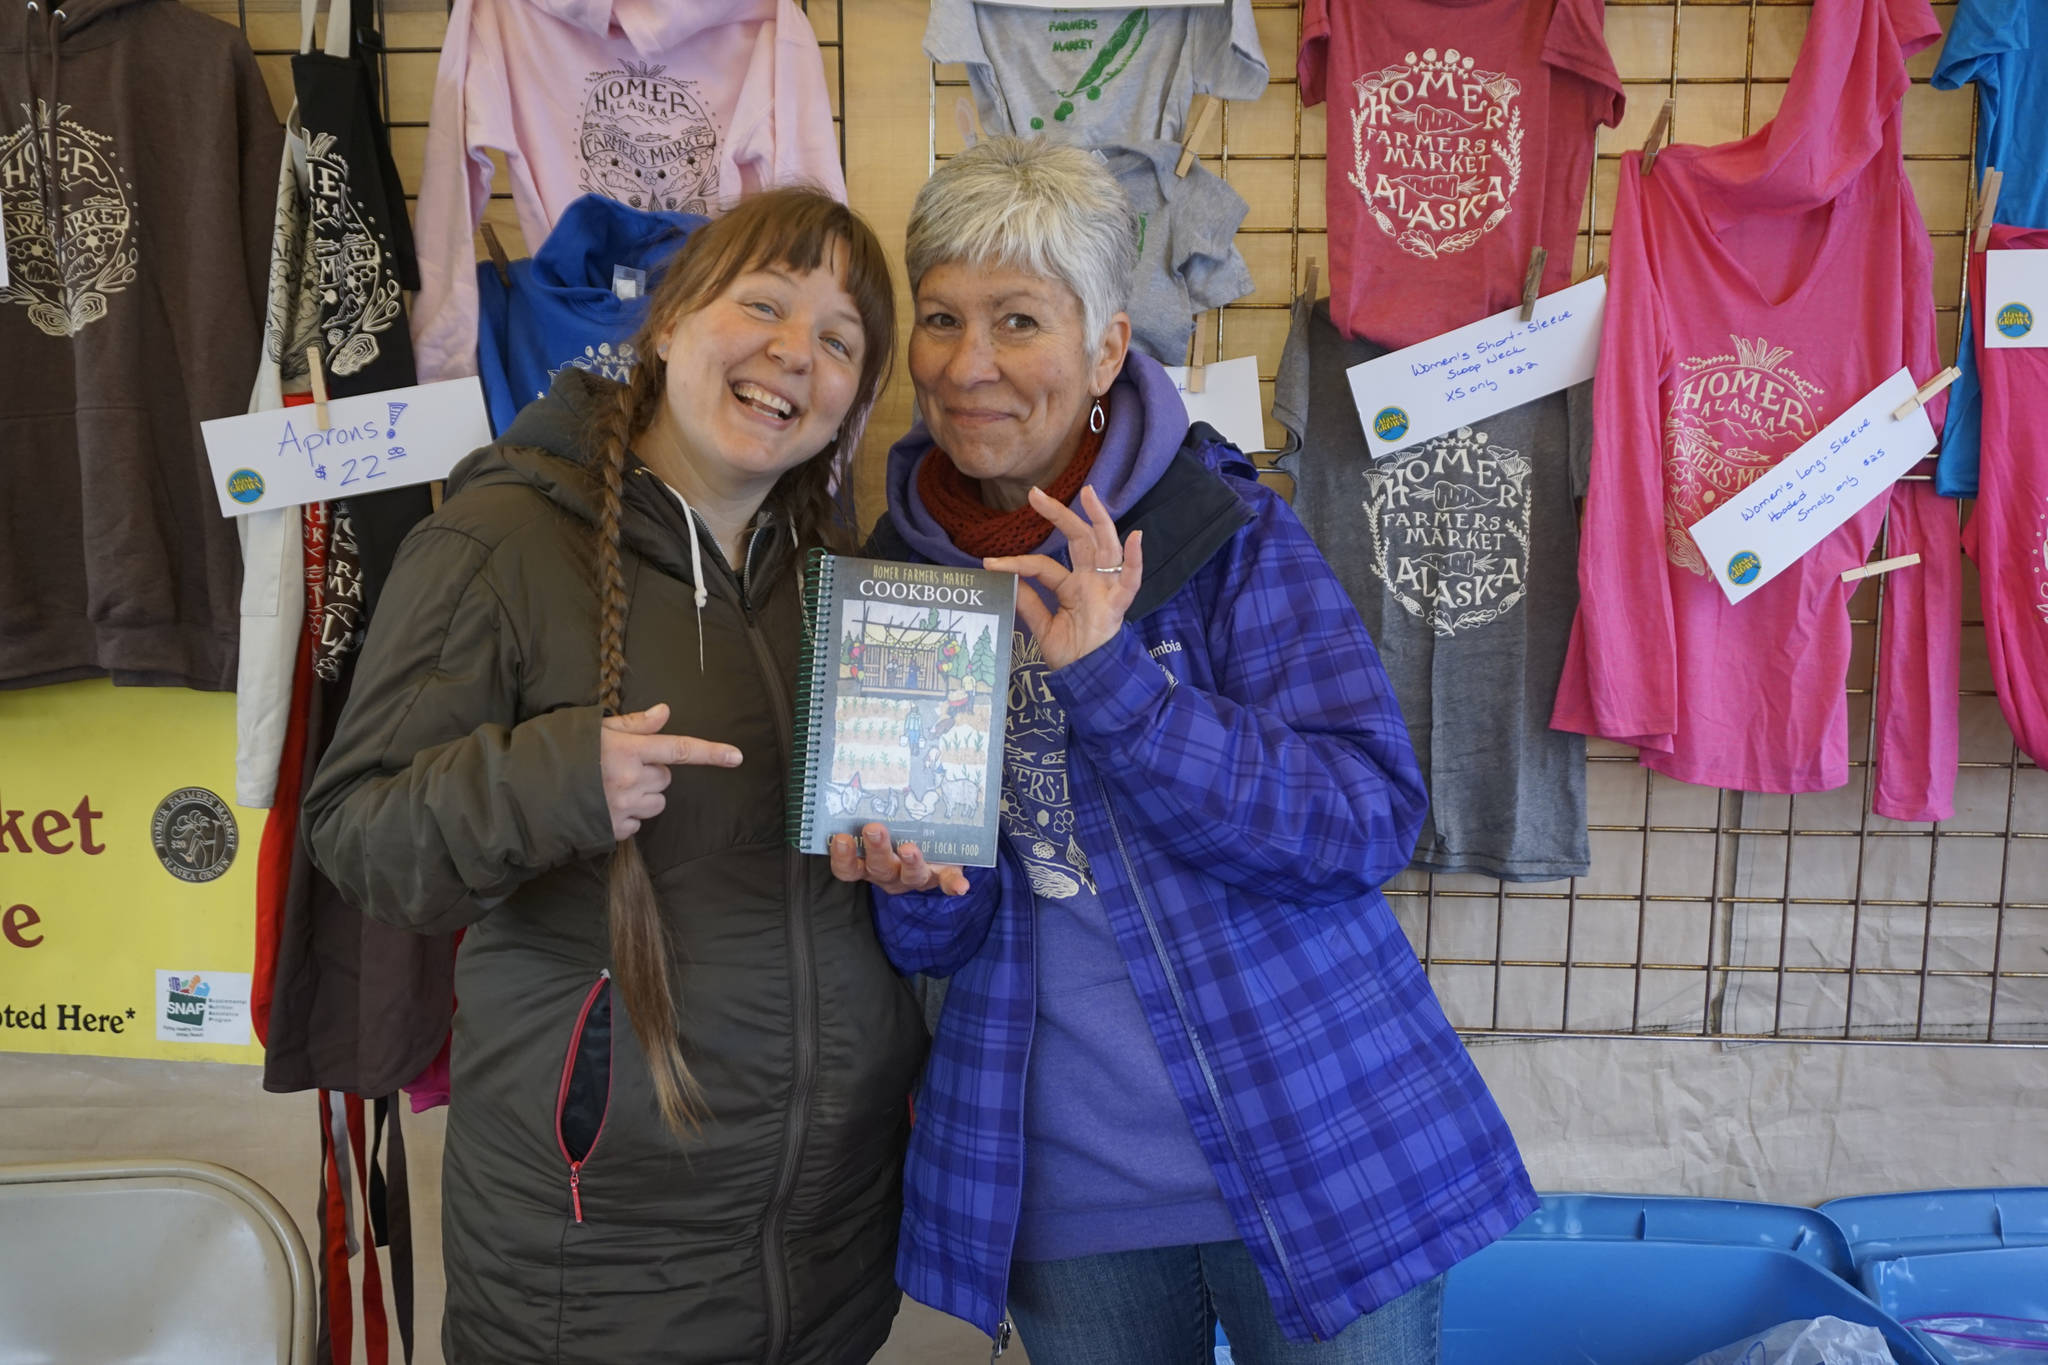 Homer Farmers Market Director Robbi Mixon, left, and Margarida Kondak, right, display of copy of the Homer Farmers Market Cookbook at the opening of the market on May 25, 2019, in Homer, Alaska. (Photo by Michael Armstrong/Homer News)